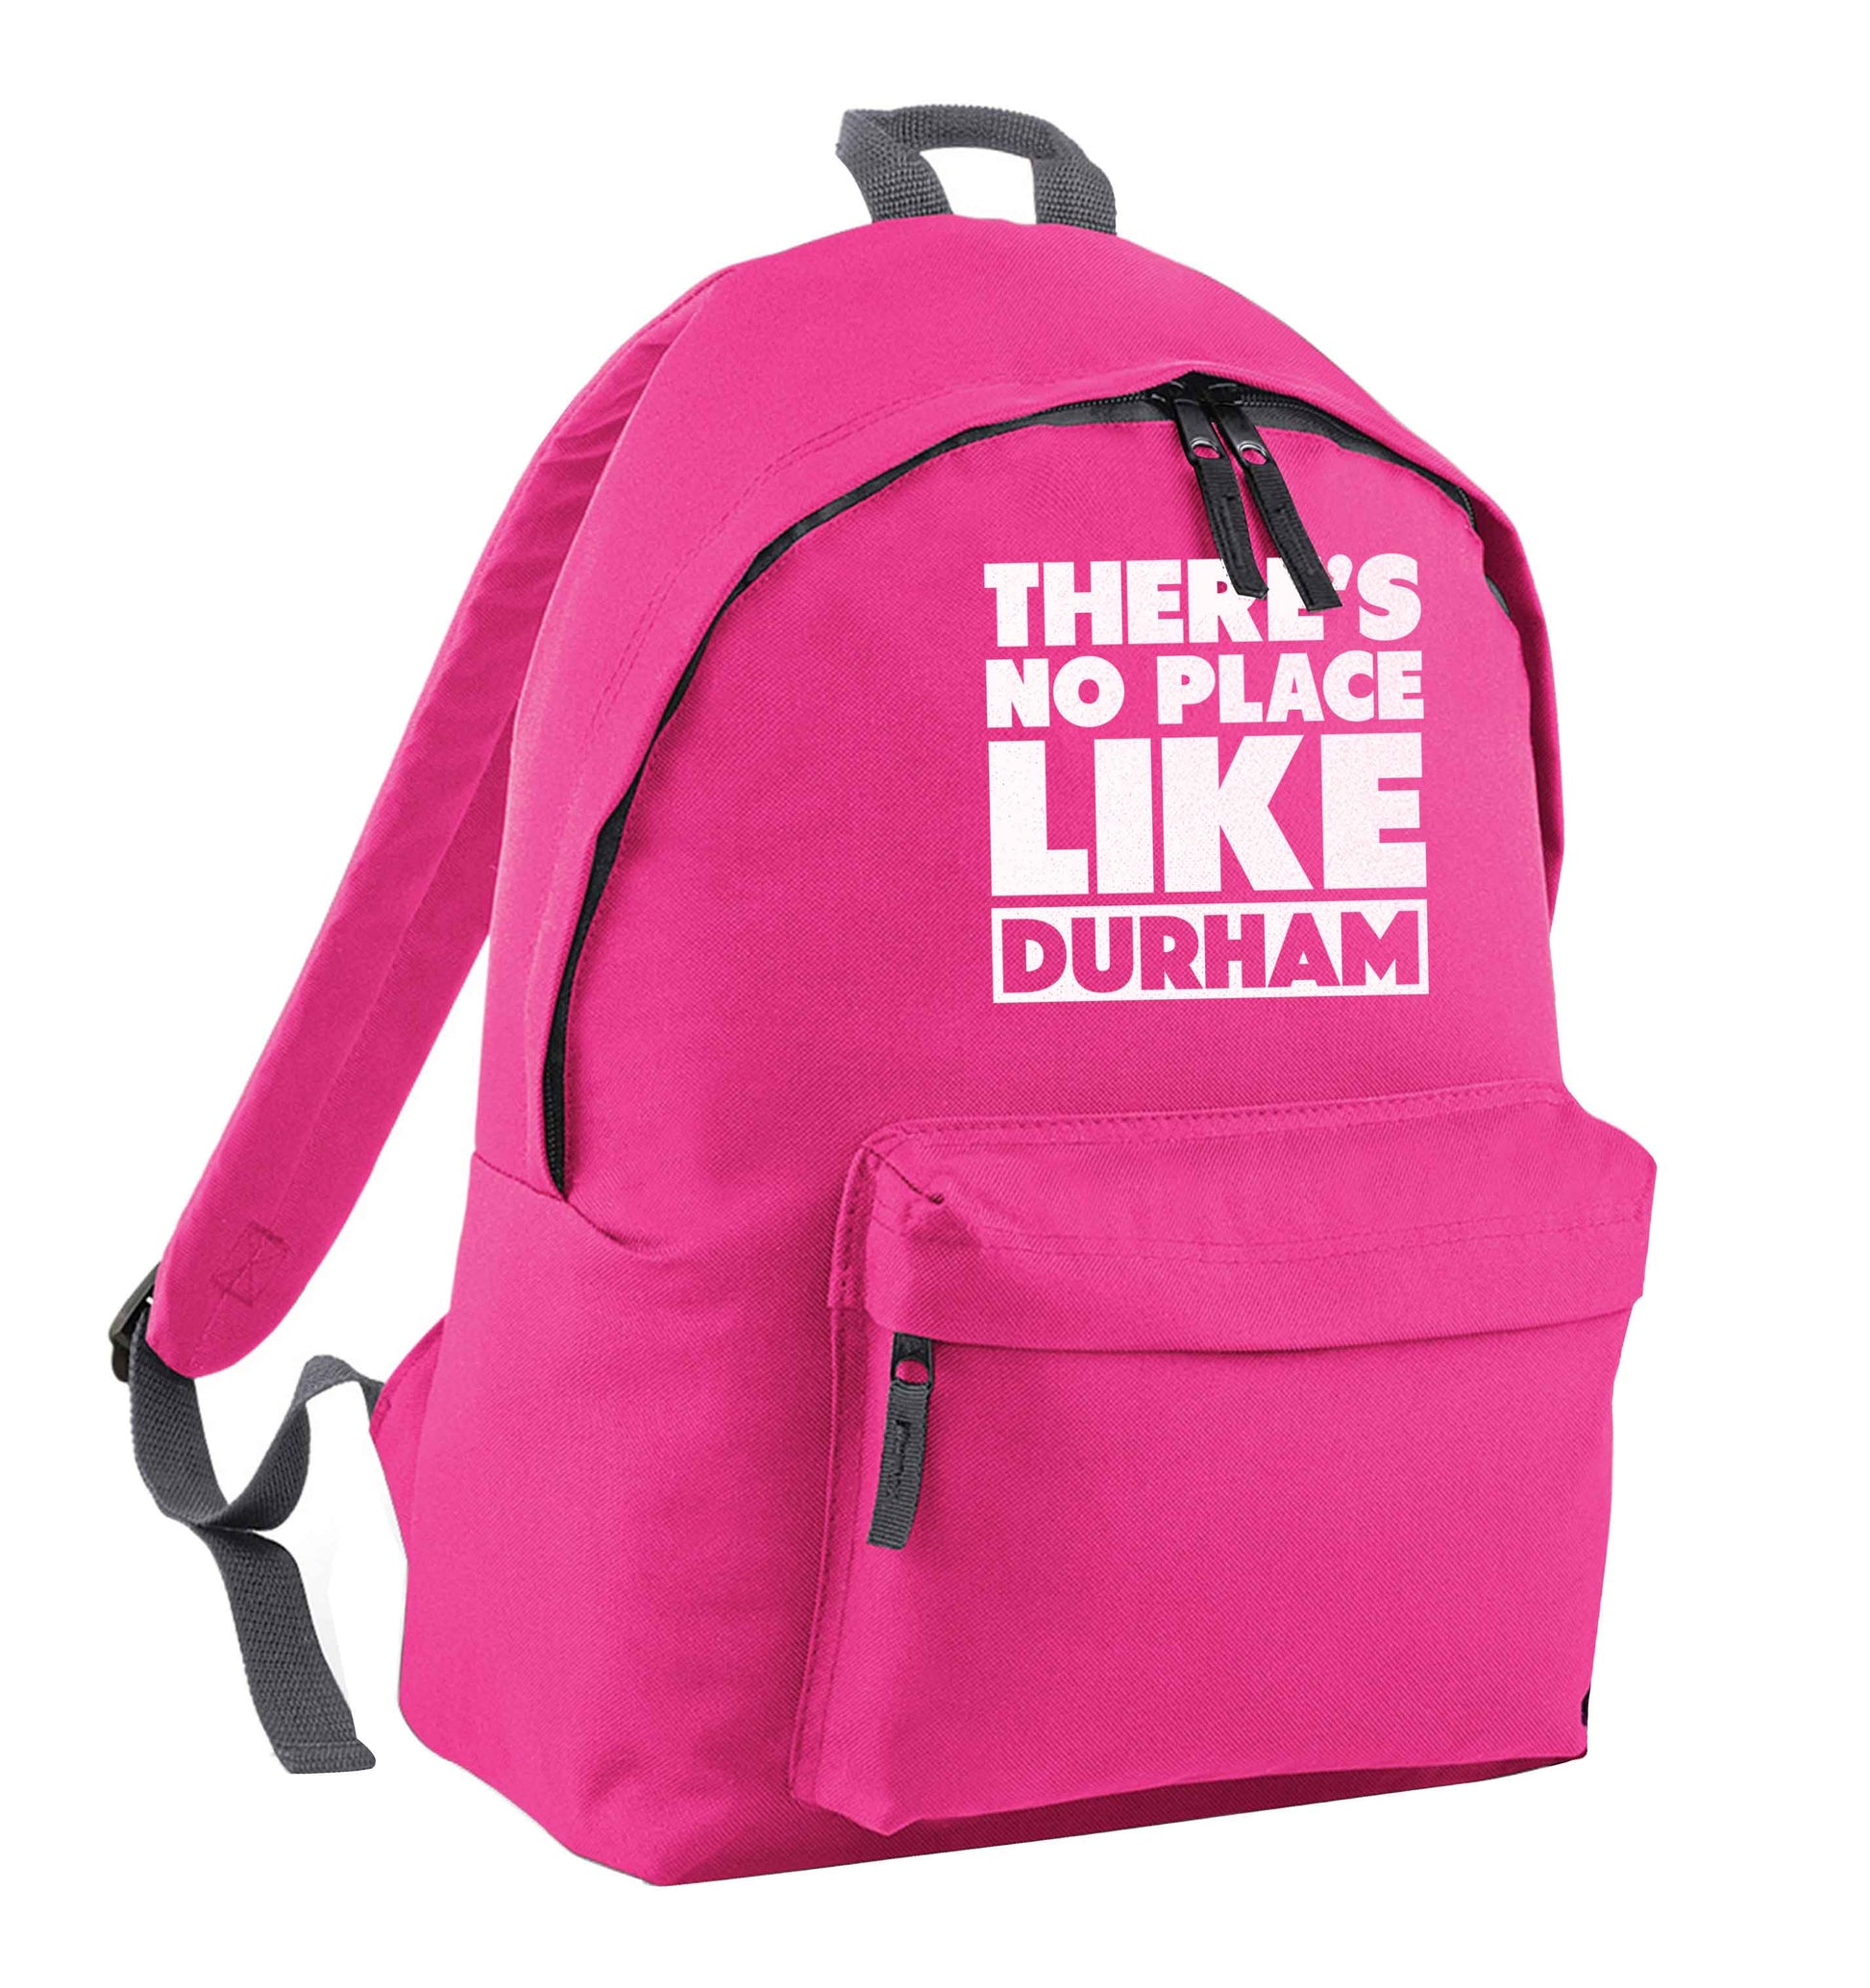 There's no place like Durham pink children's backpack